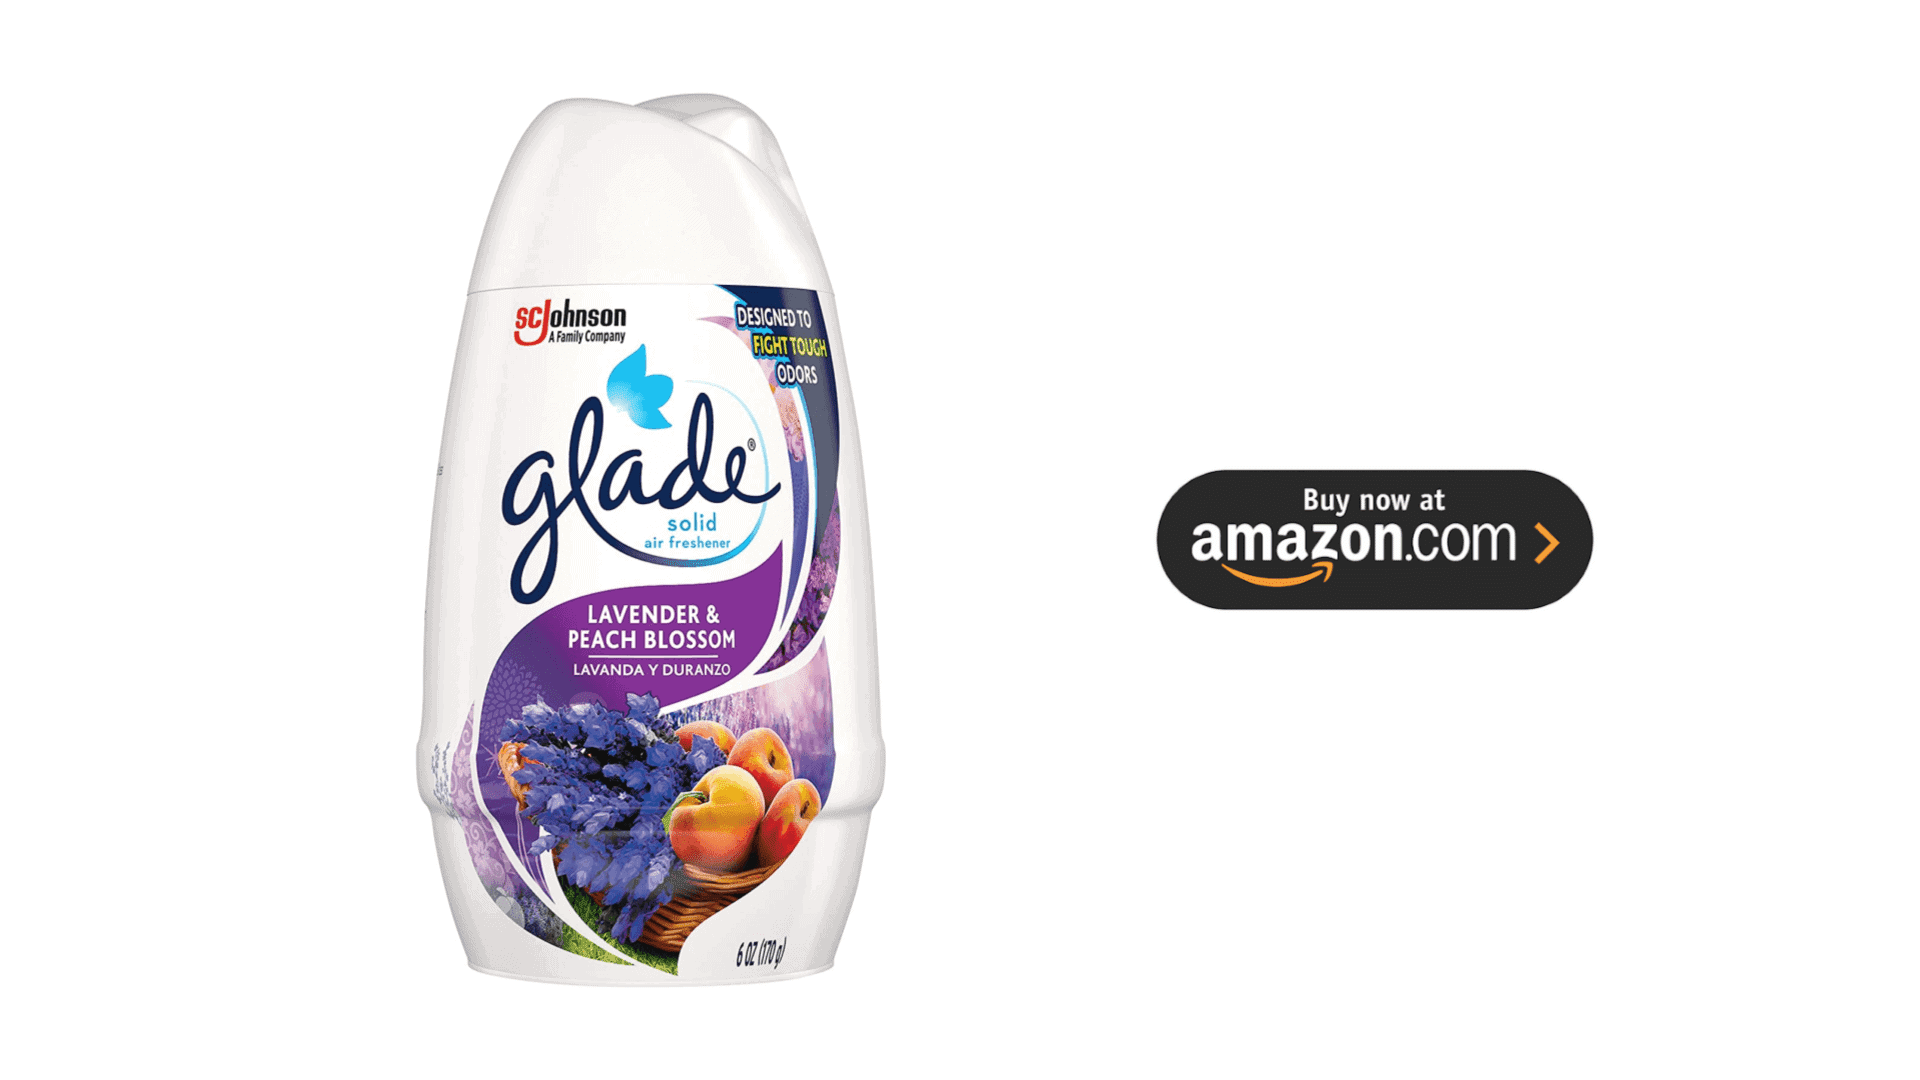 Glade Solid Air Freshener Sold on Amazon